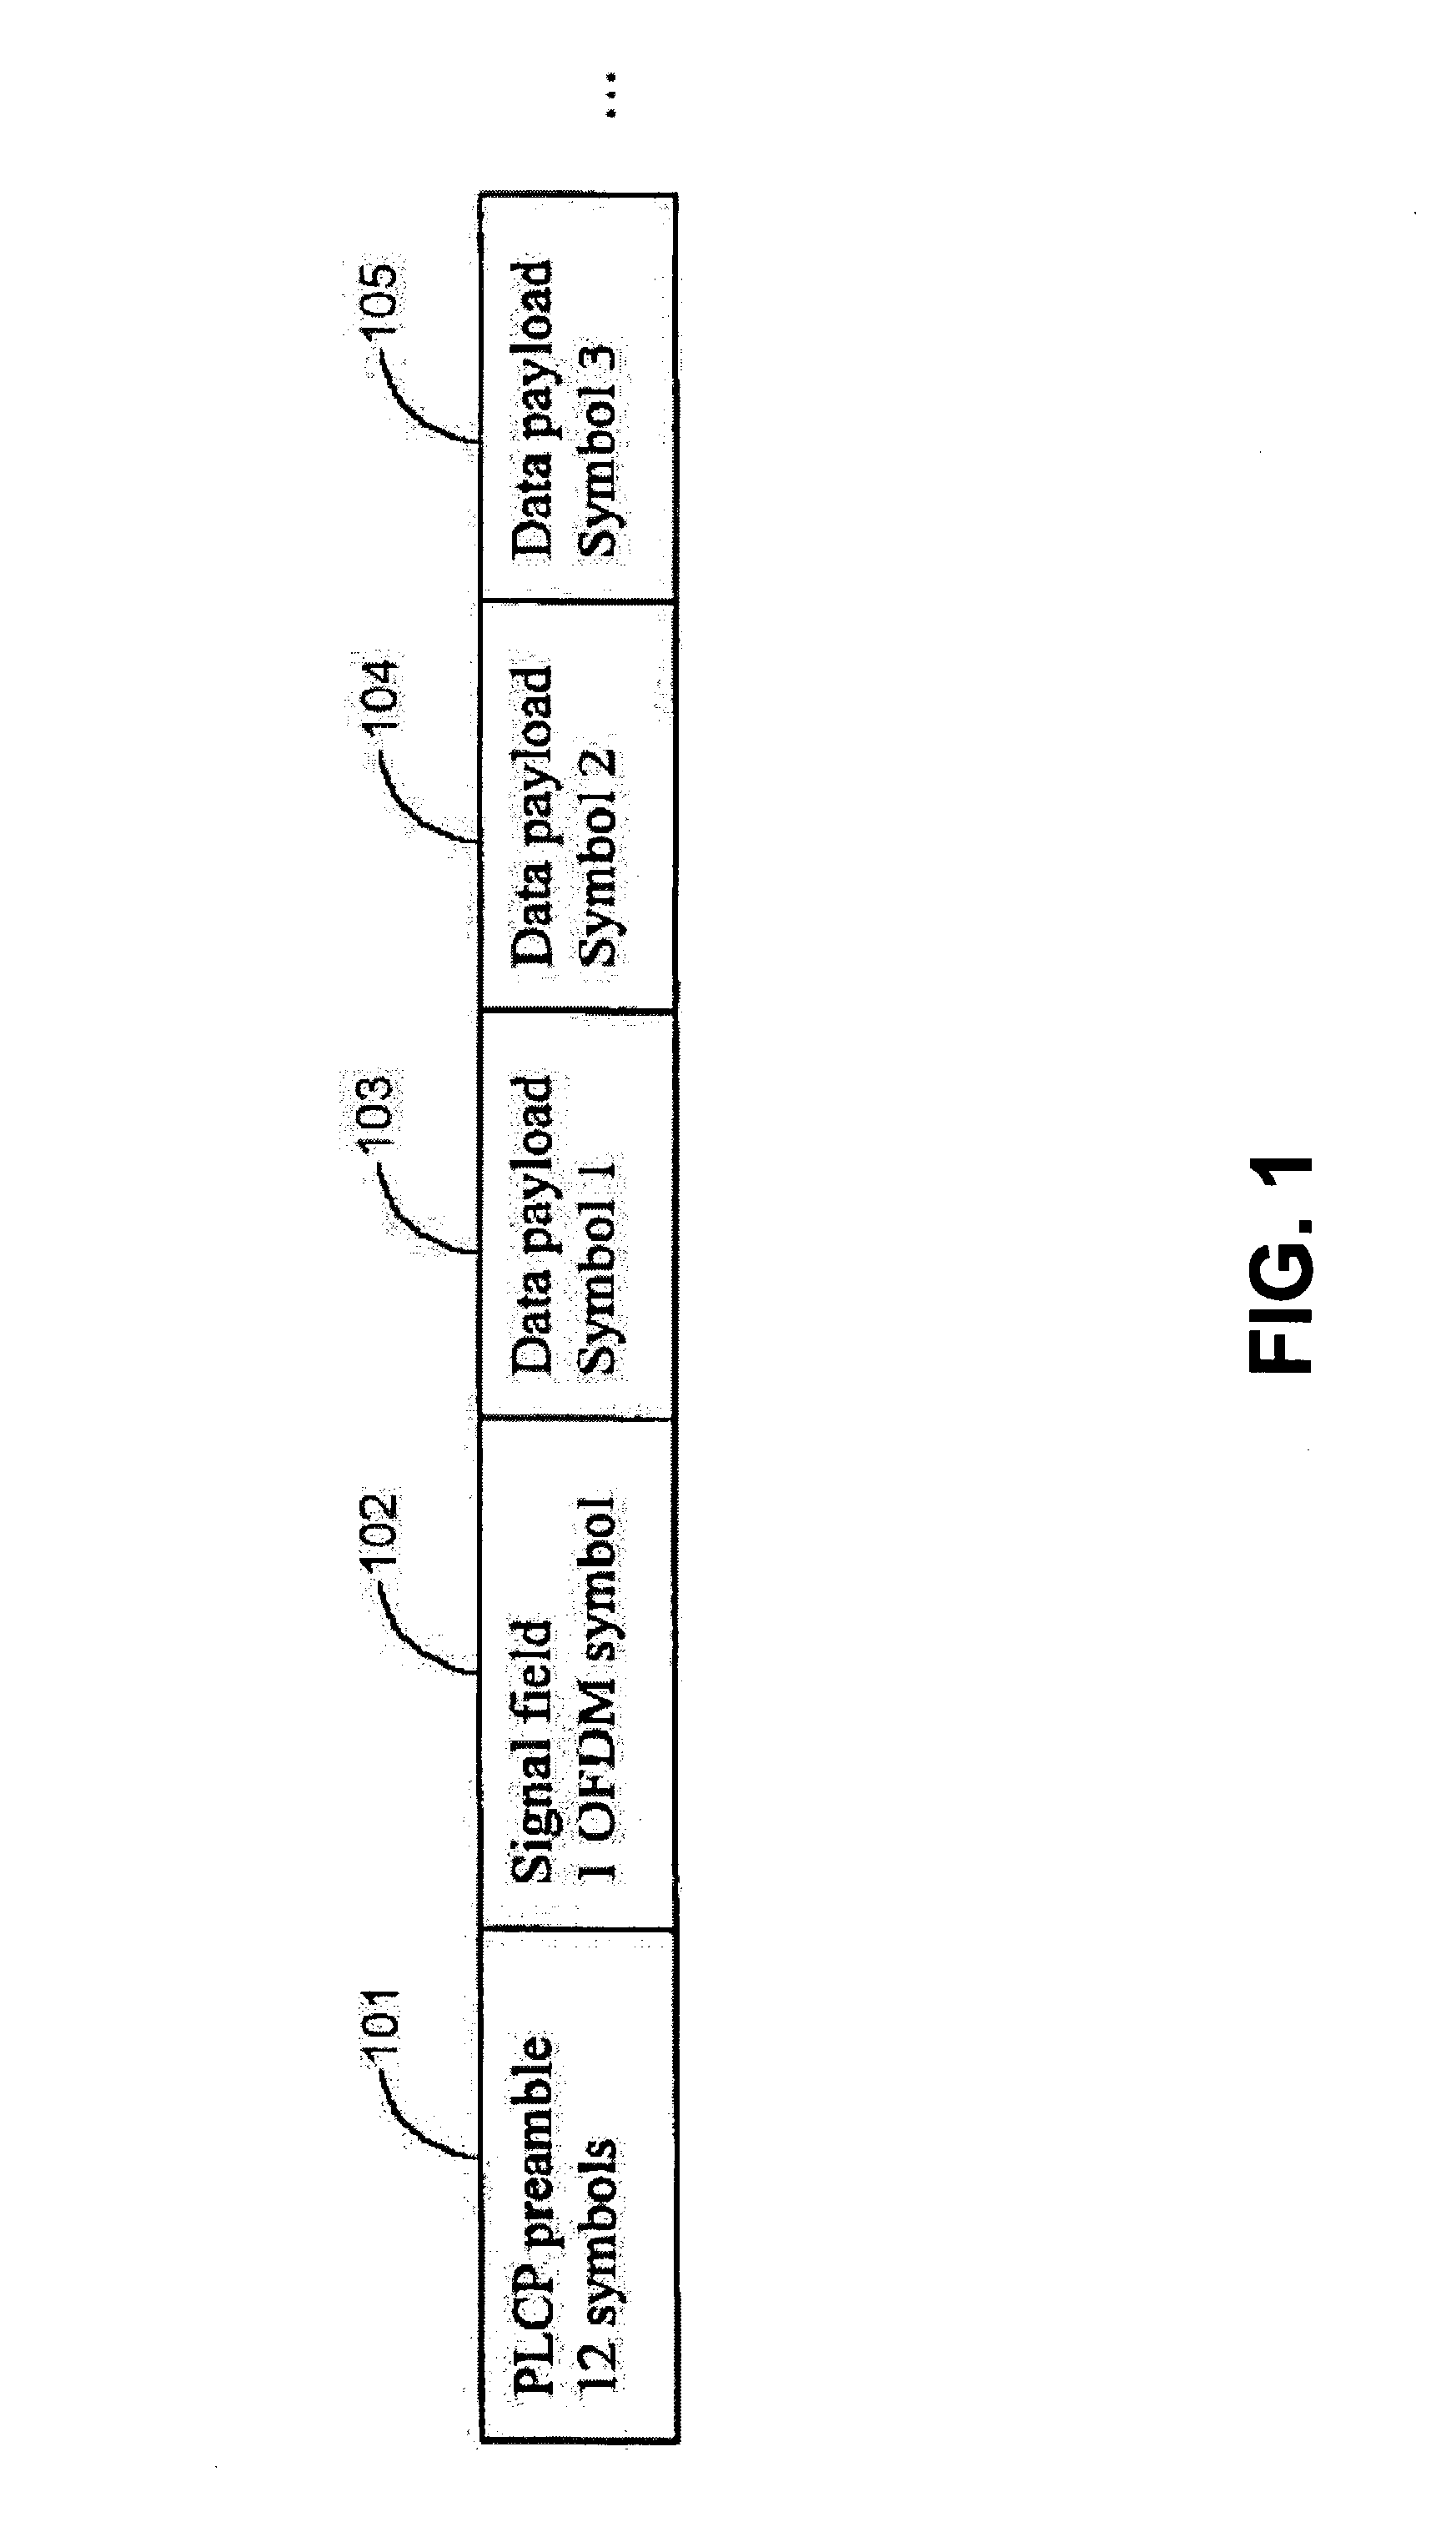 Preamble detector method and device for OFDM systems